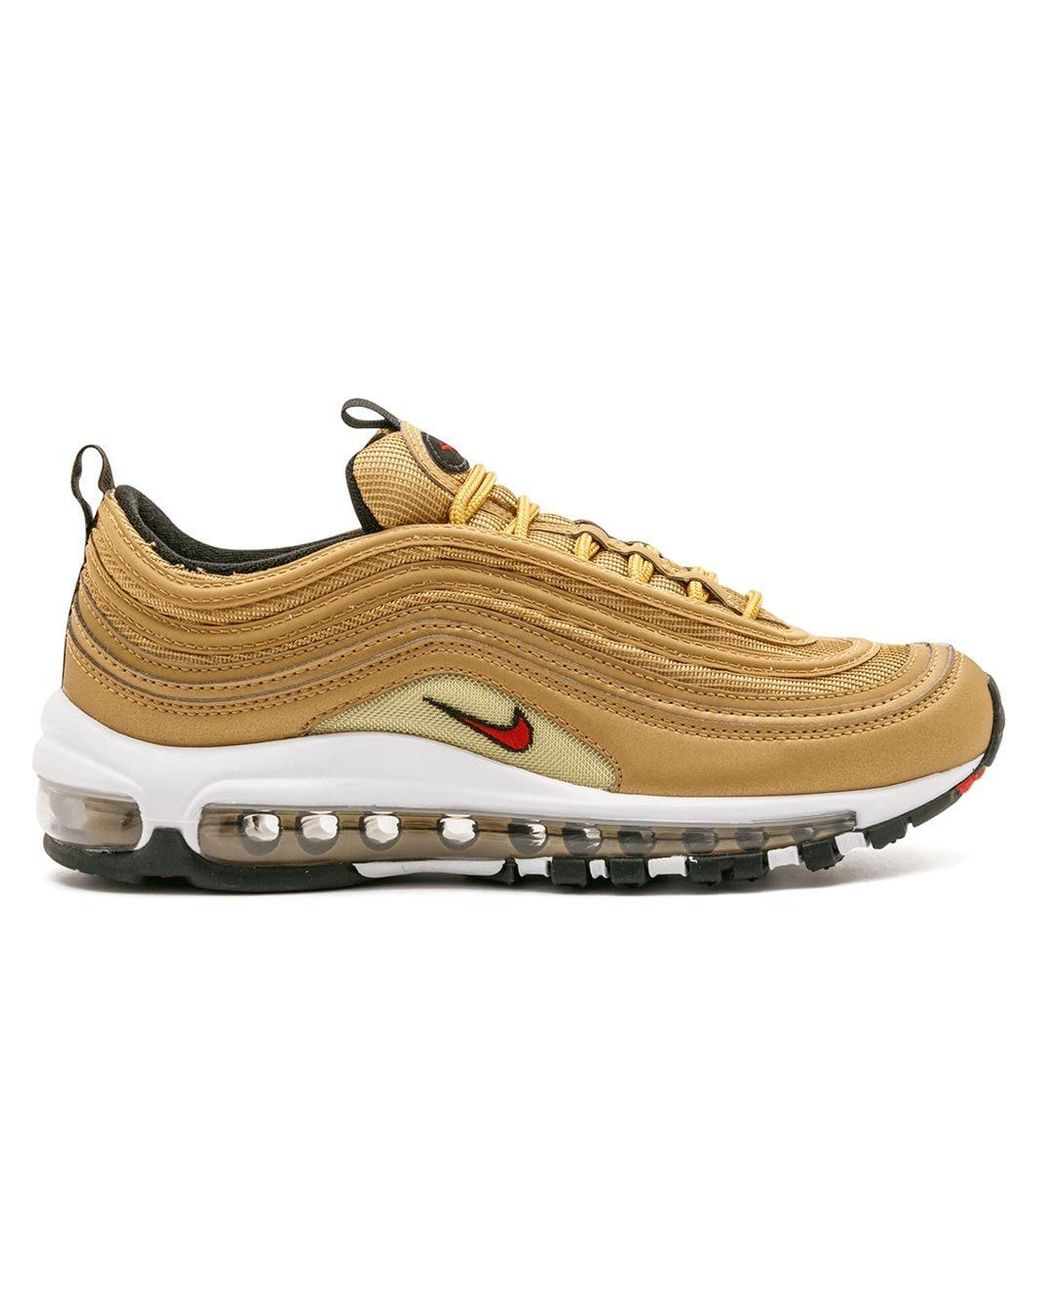 Nike Womens Air Max 97 Og Qs Shoes in Gold (Metallic) - Save 59 ...